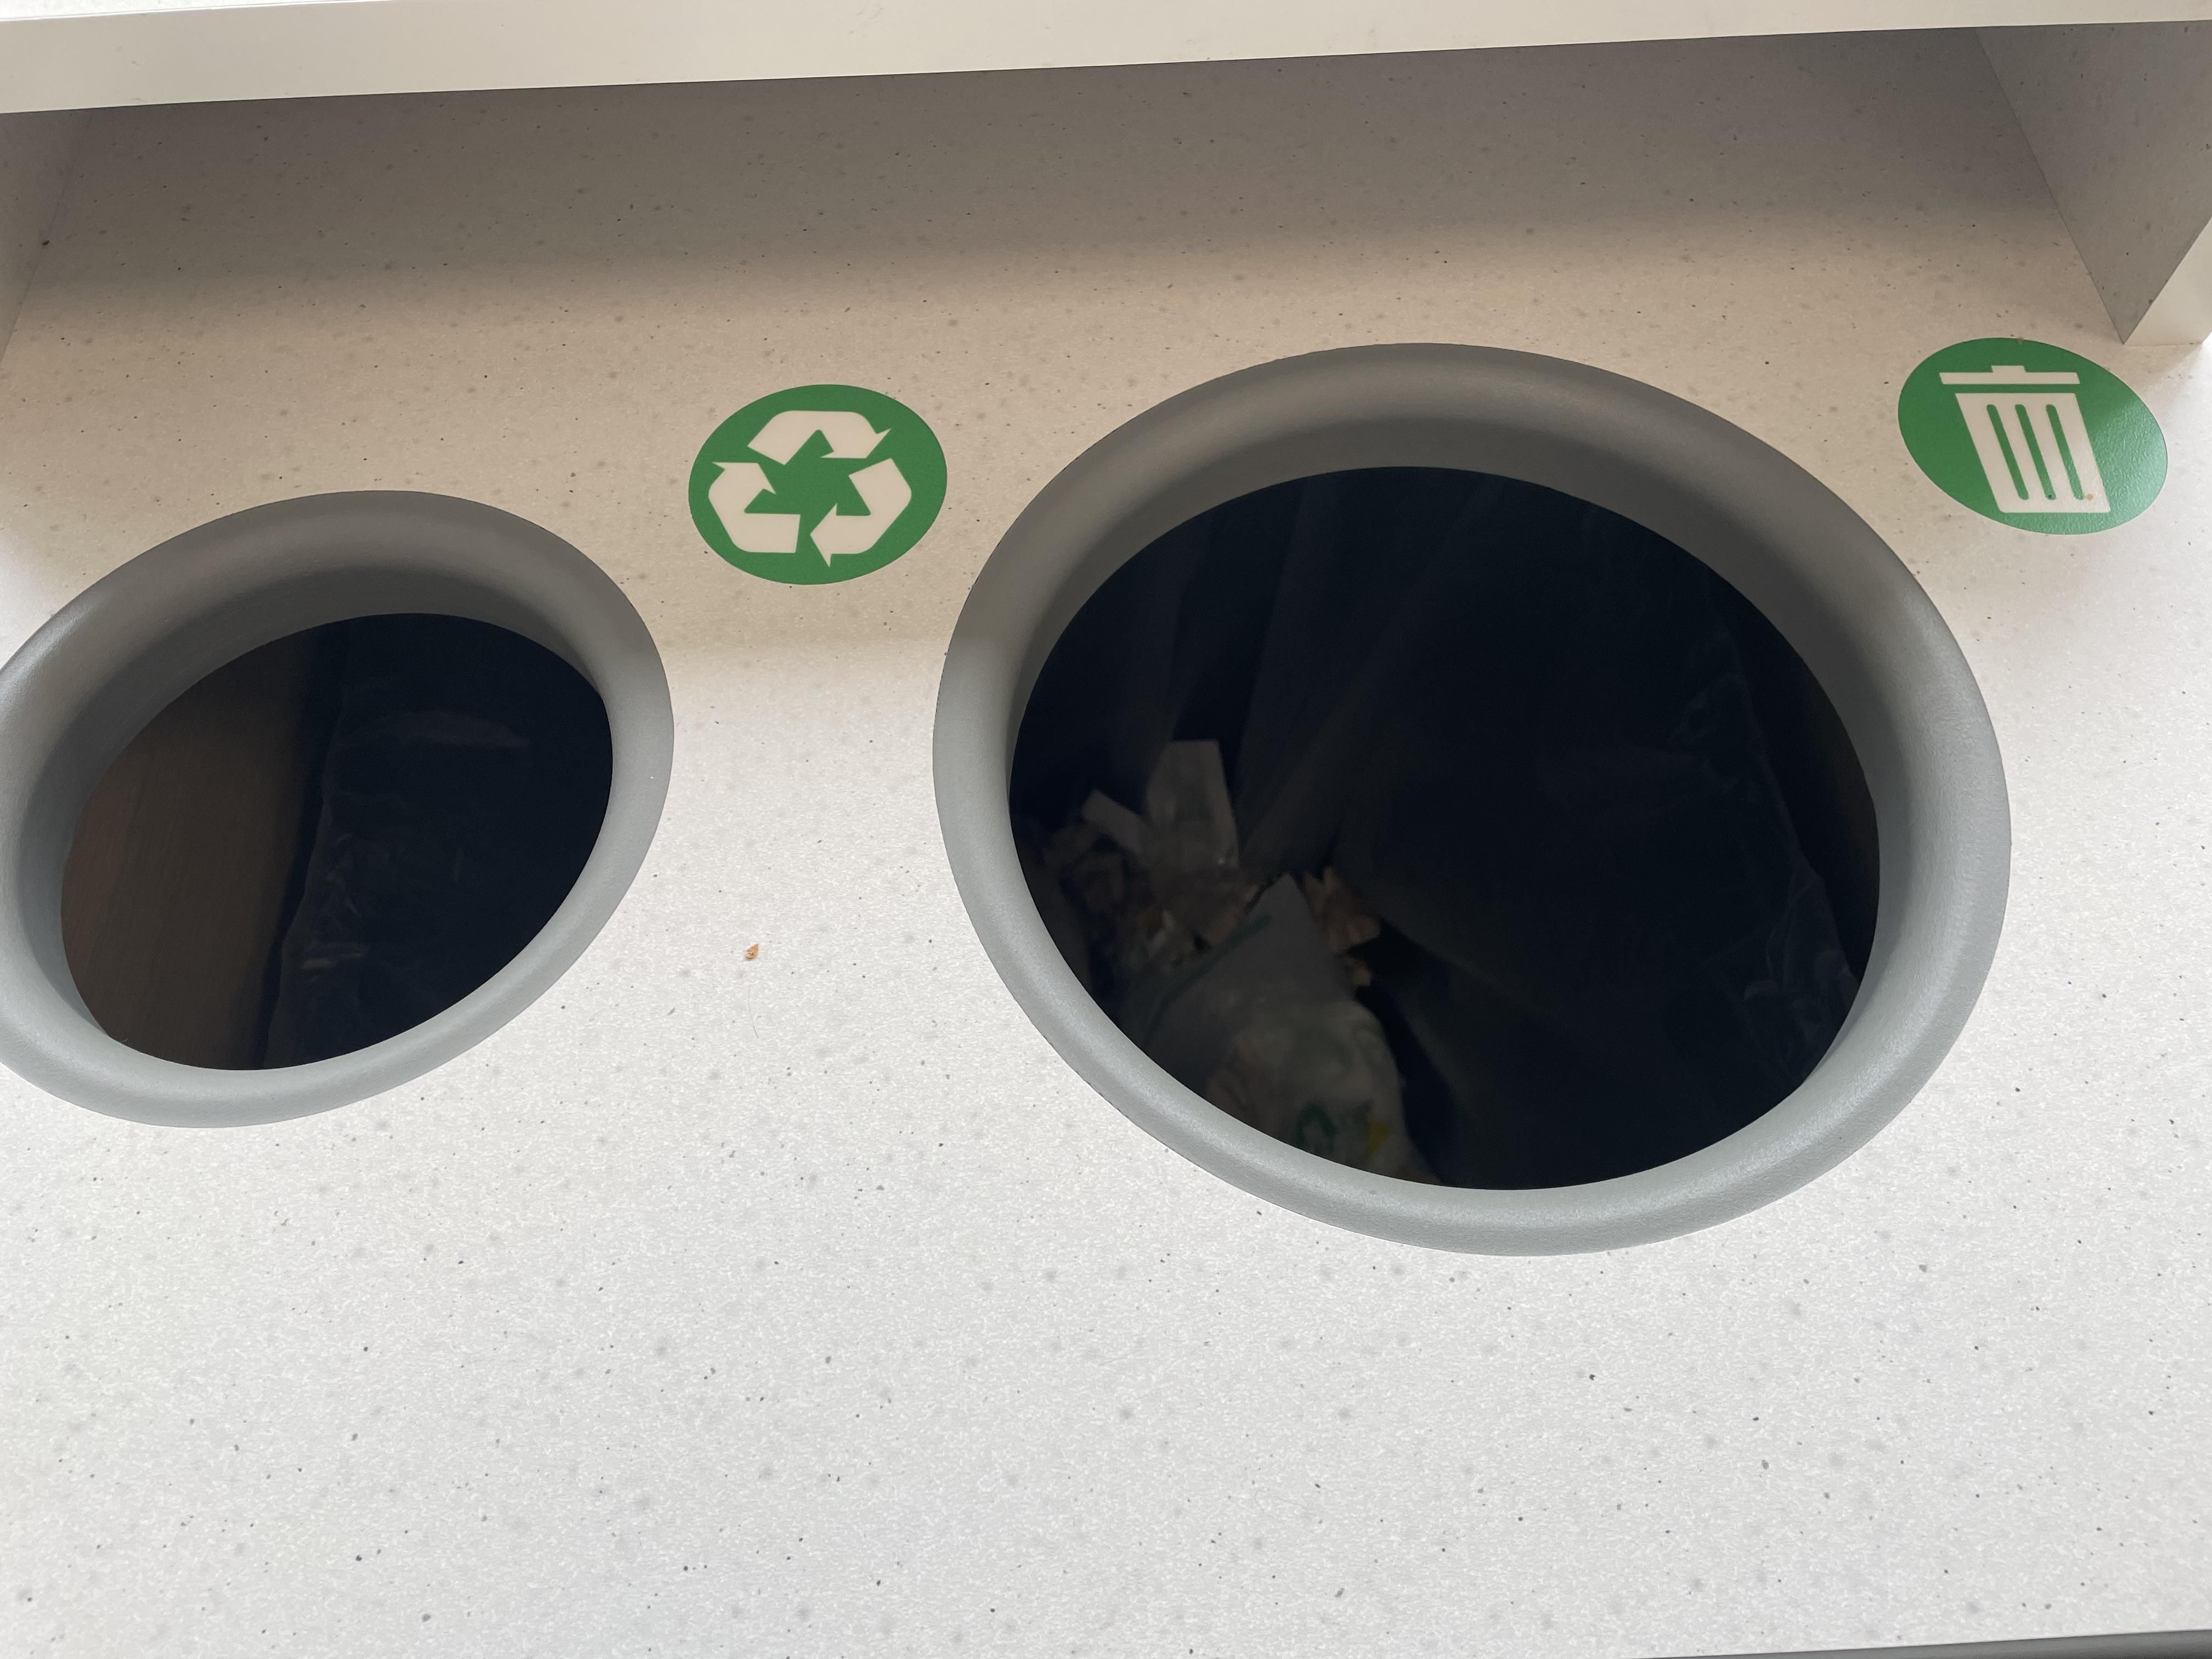 Subway restaurant’s garbage and recycling both go into the same bin.